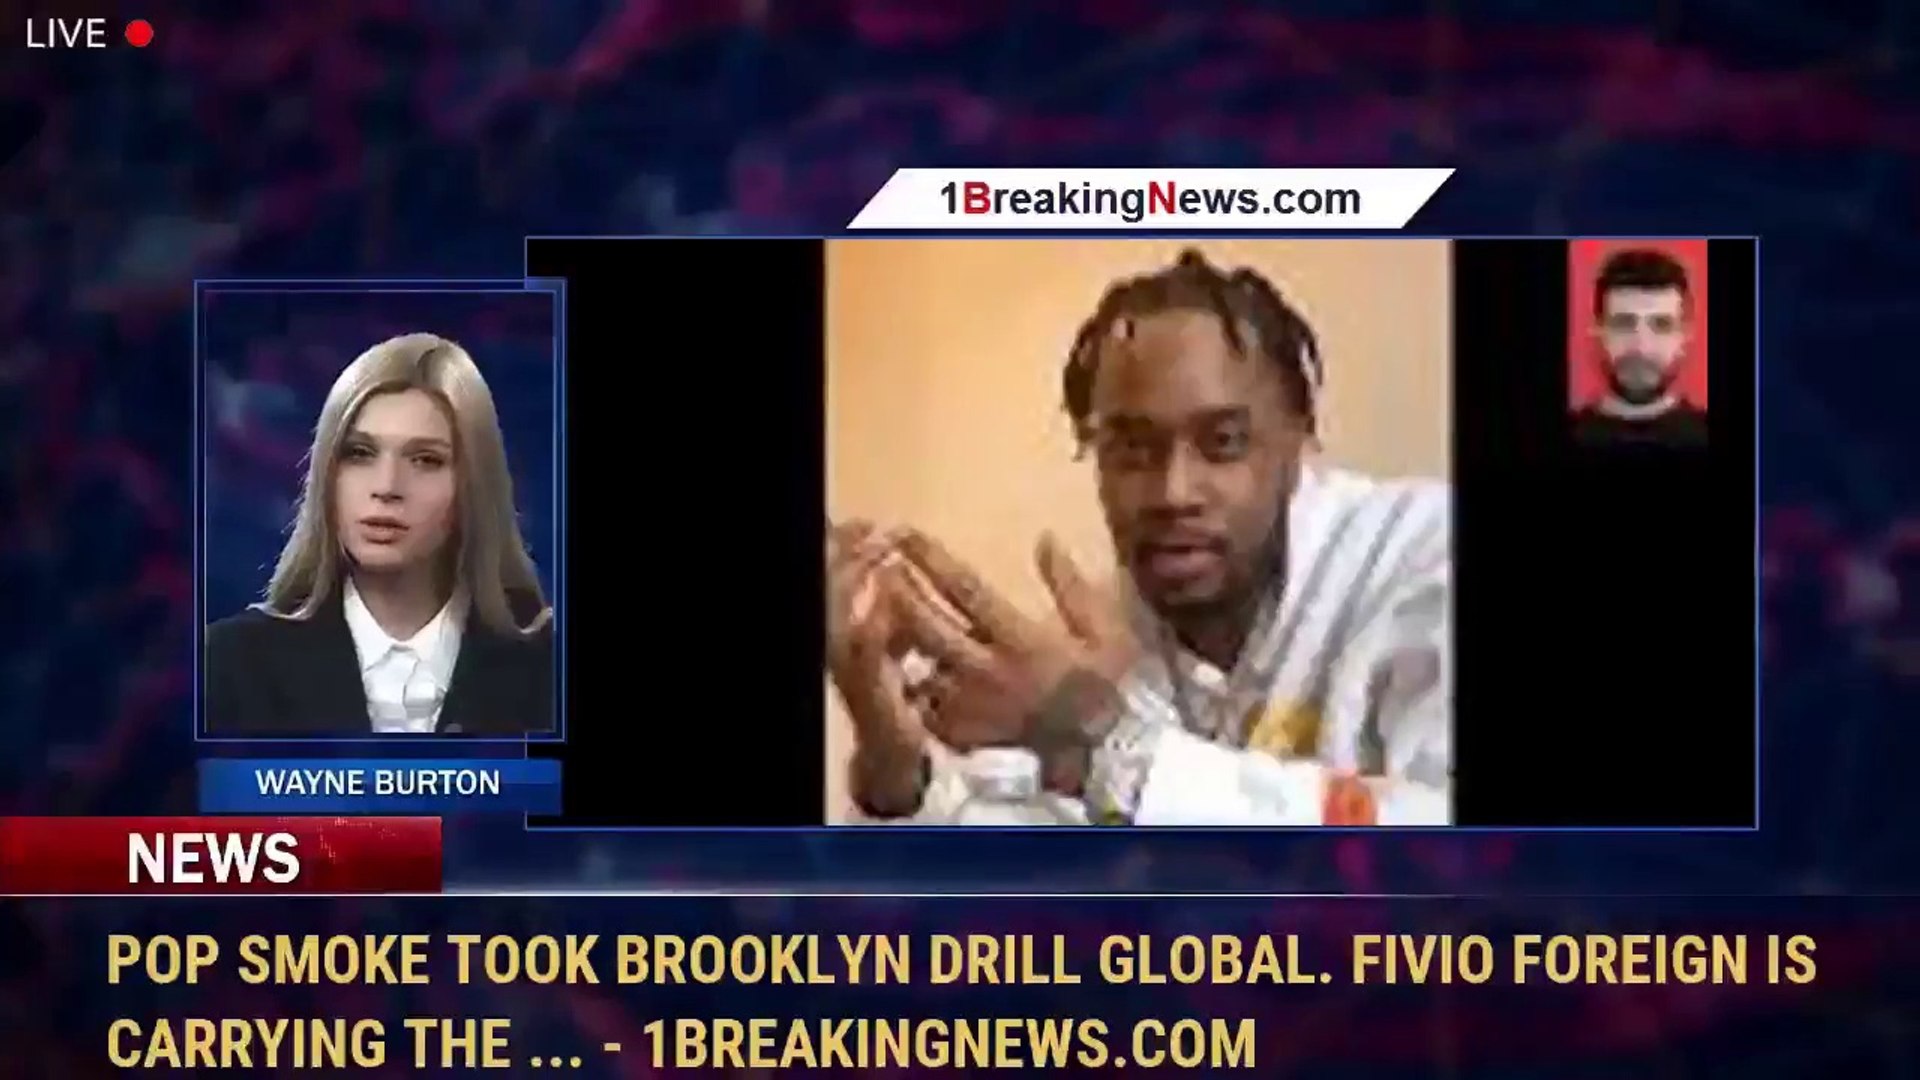 ⁣Pop Smoke Took Brooklyn Drill Global. Fivio Foreign Is Carrying the ... - 1breakingnews.com